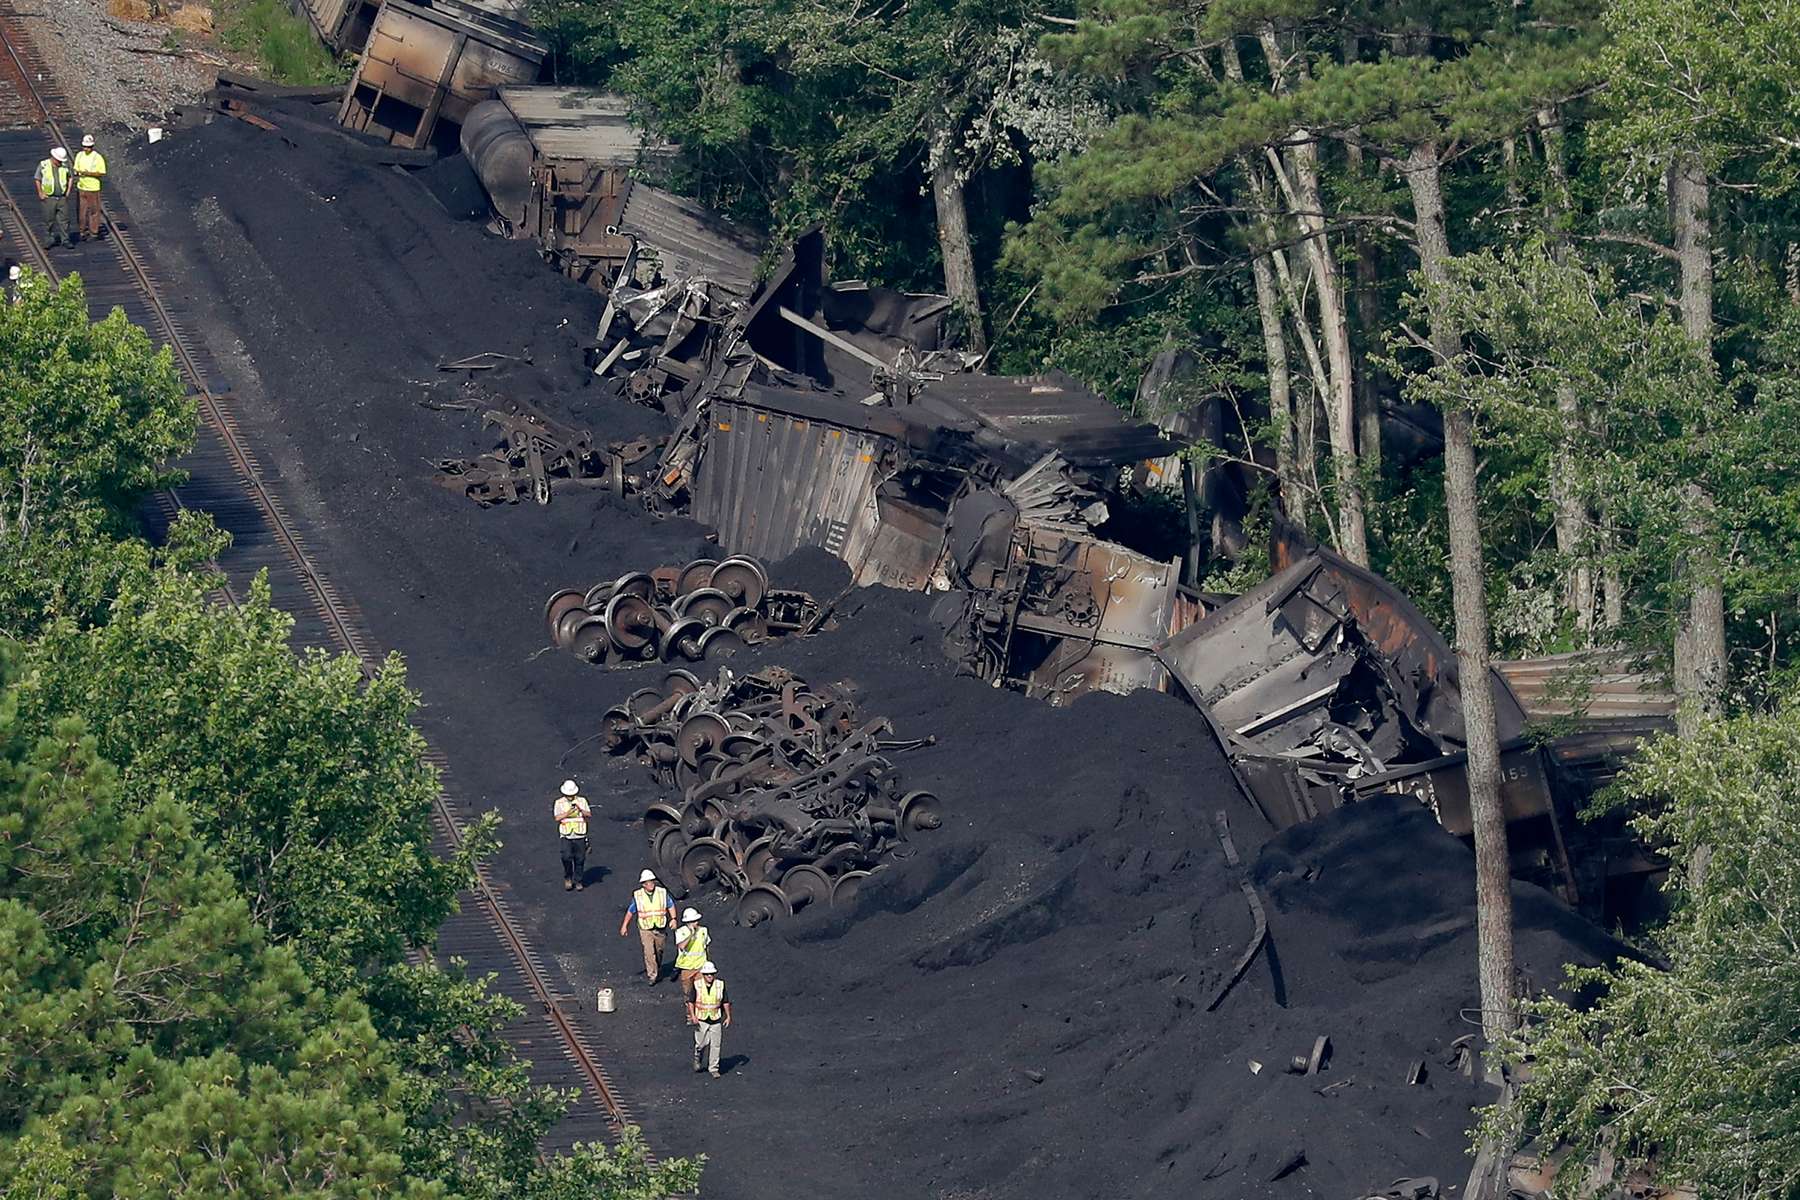 Workers are seen around the site after 36 railroad cars containing 3,600 tons of coal derailed in the Great Dismal Swap Wednesday afternoon June 26, 2019. The train derailed around 4:20 a.m. Tuesday.